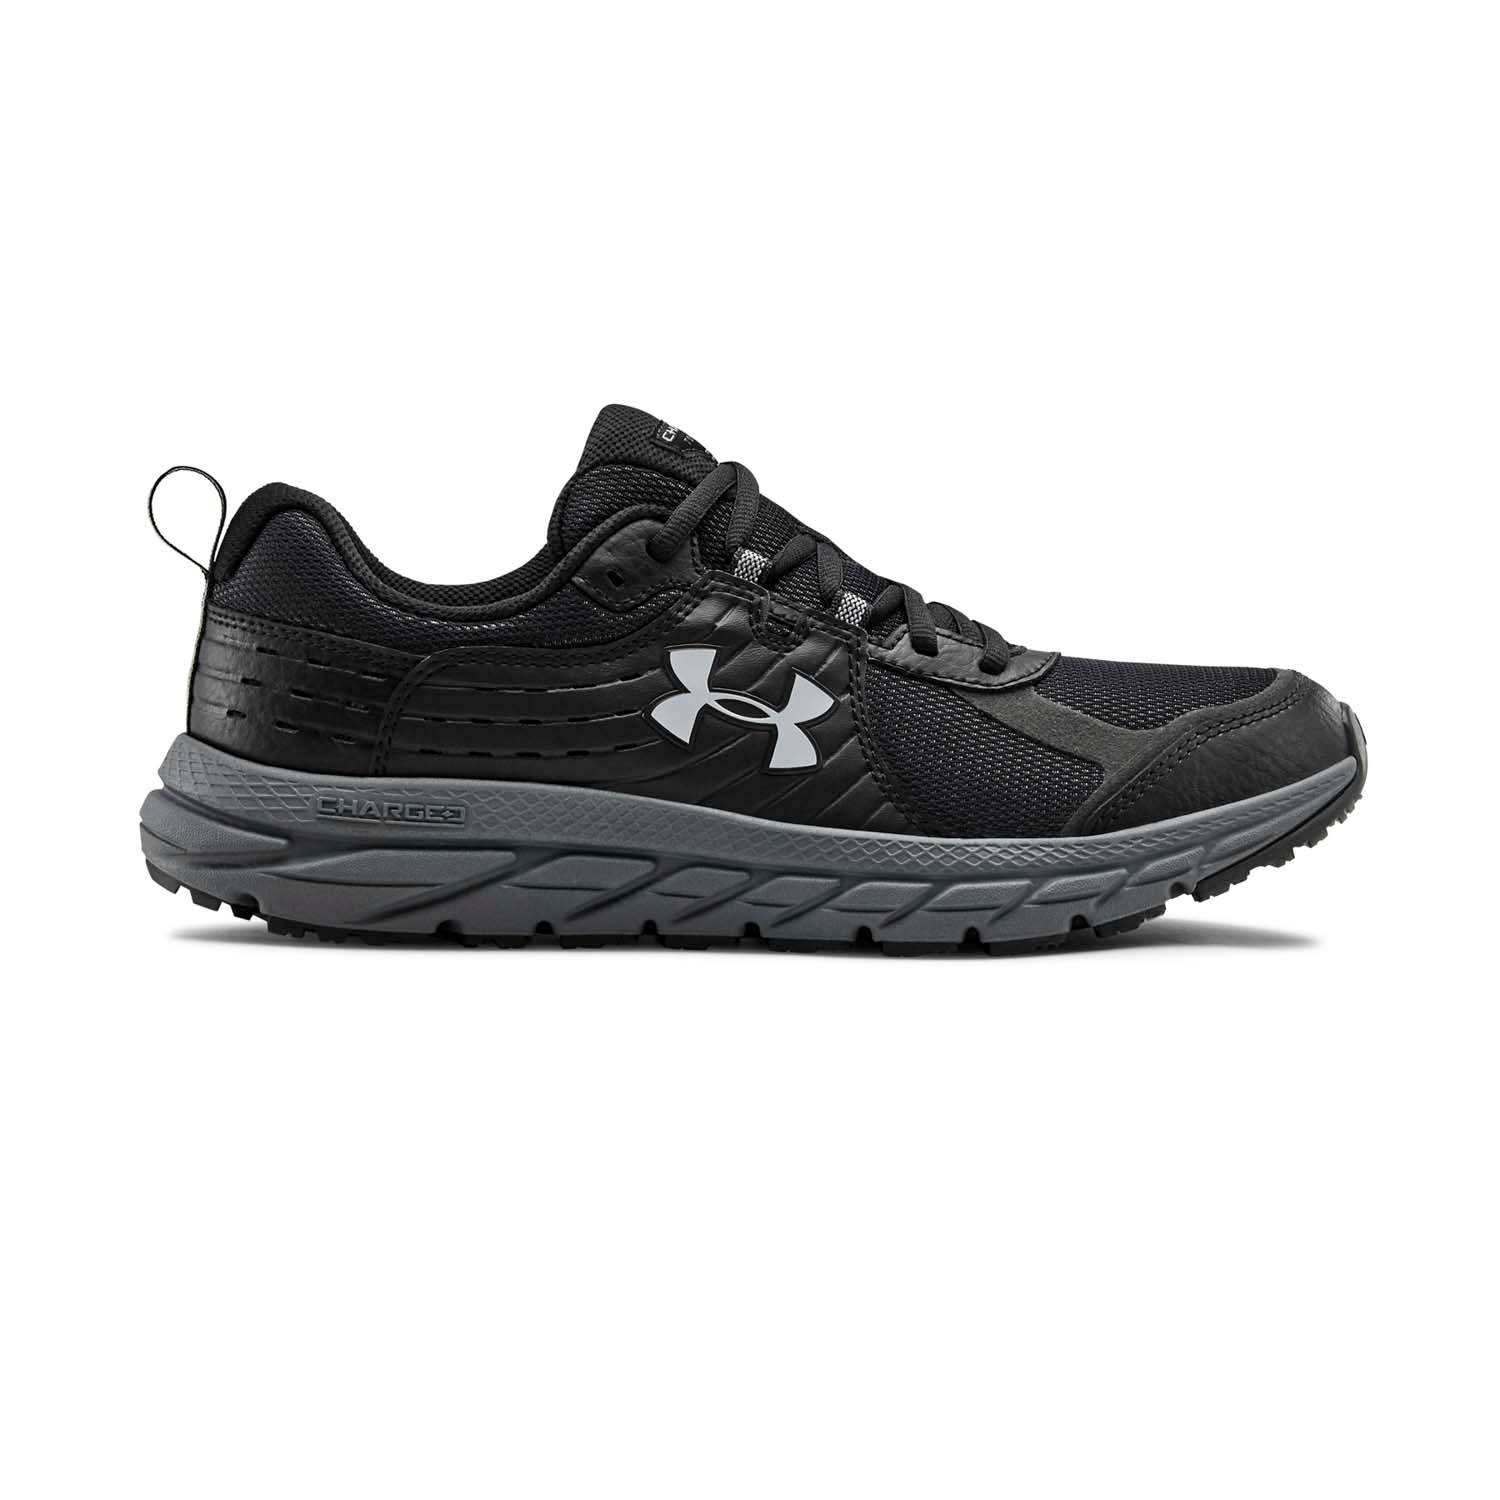 UNDER ARMOUR CHARGED TOCCOA 2 RUNNING SHOE